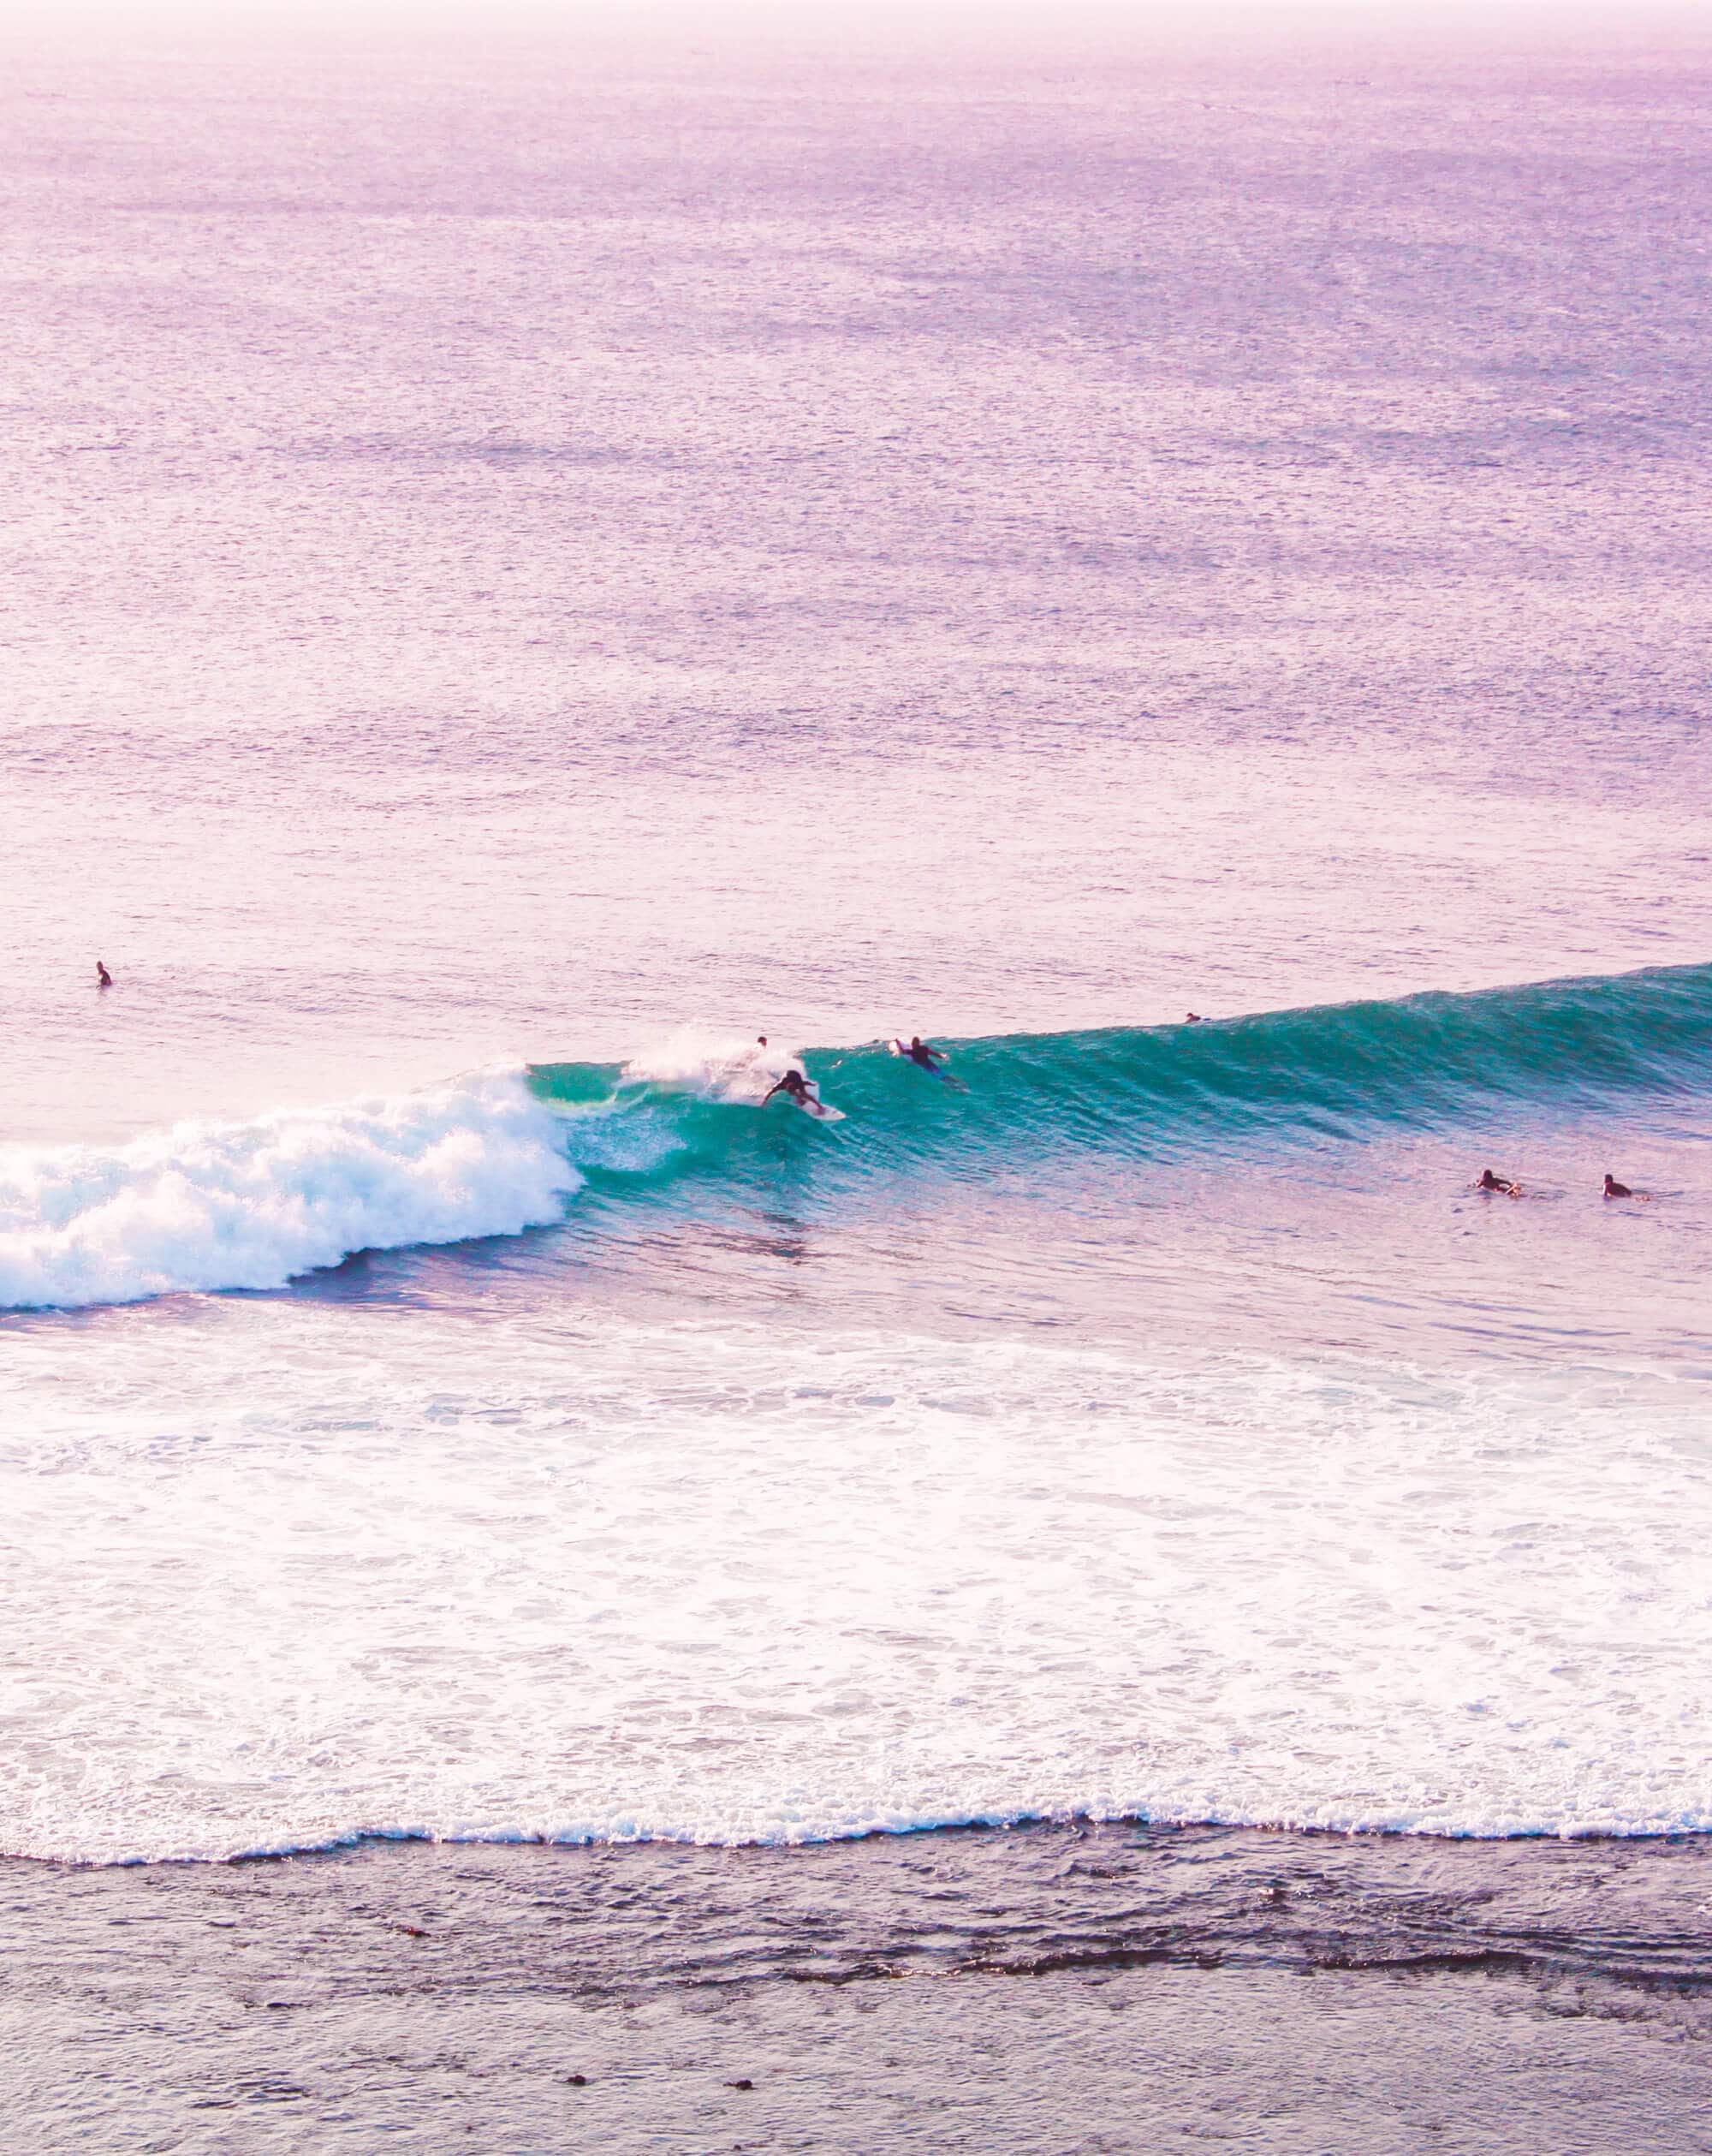 Surfer on a wave at Uluwatu early in the morning, the perfect place for a surf and yoga retreat in Bali.